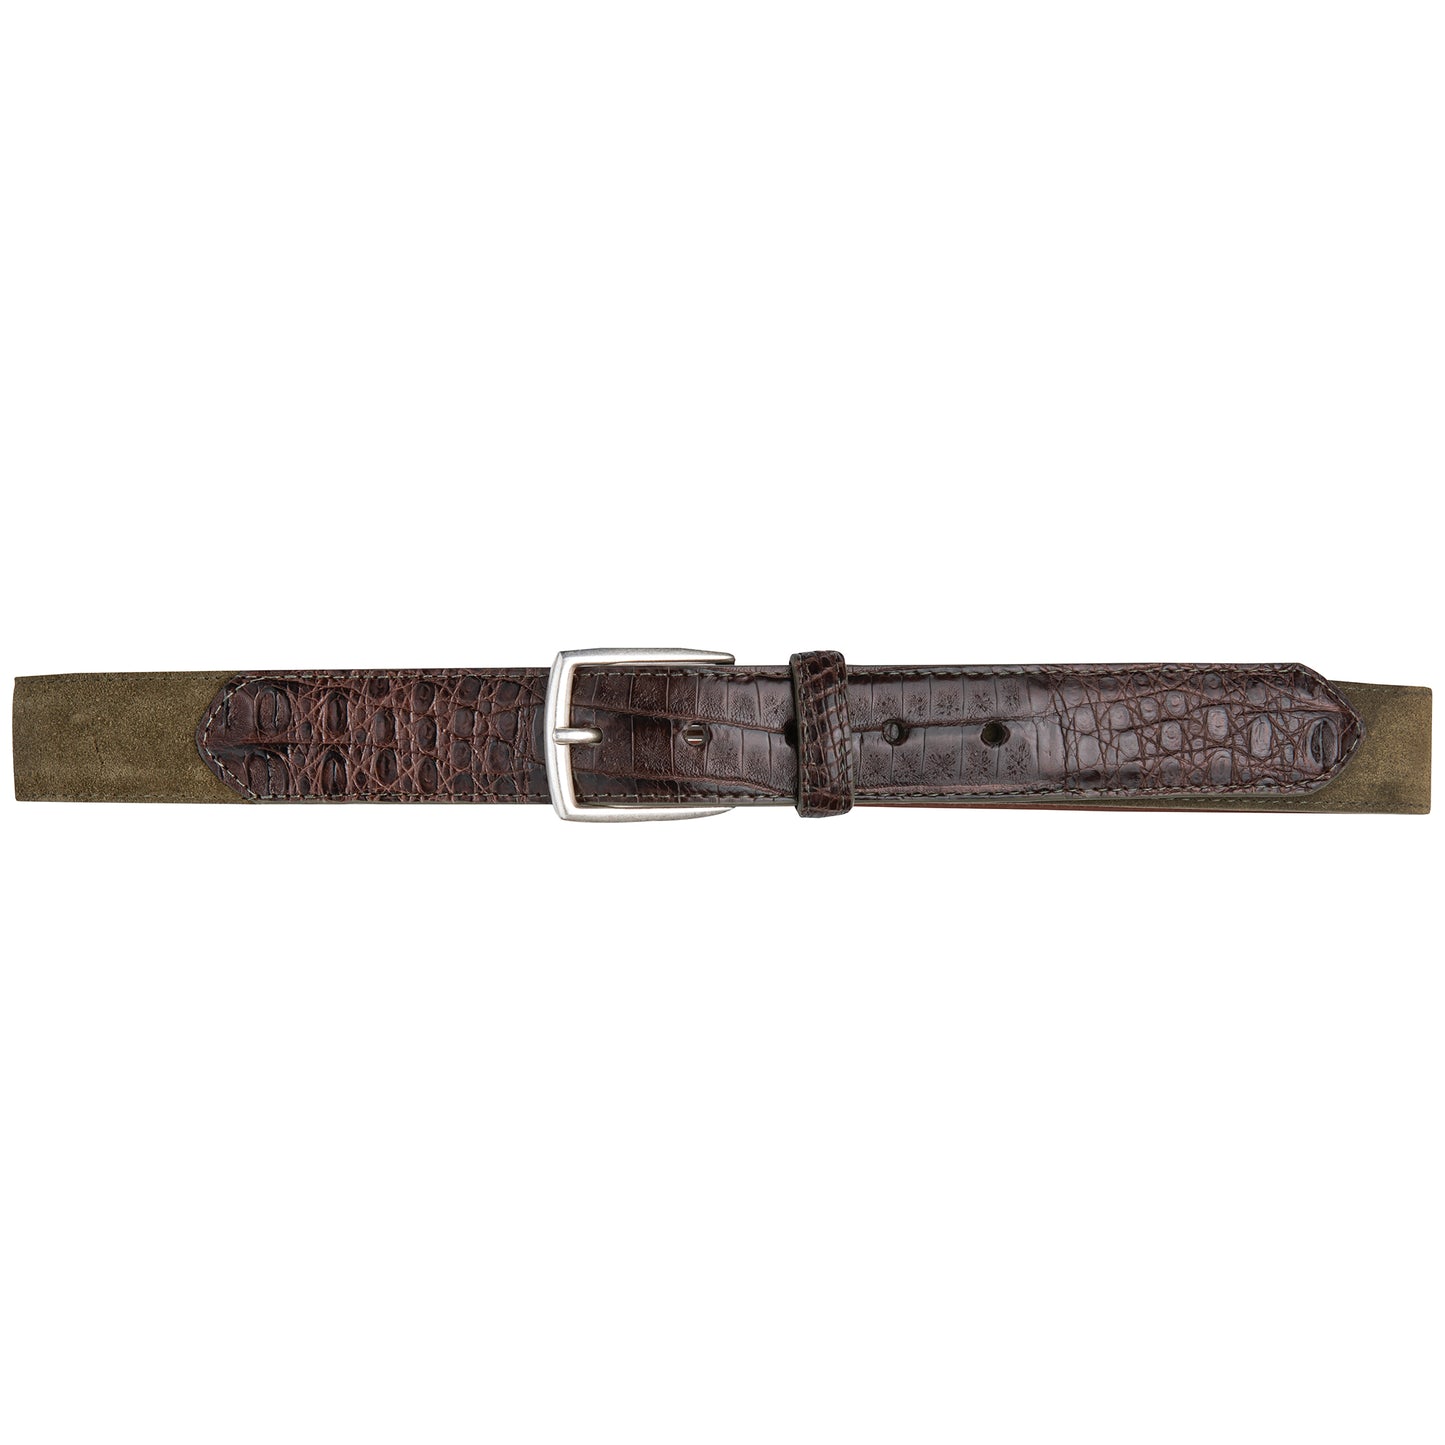 1 3/8" Sueded Calf Belt with Caiman Croc